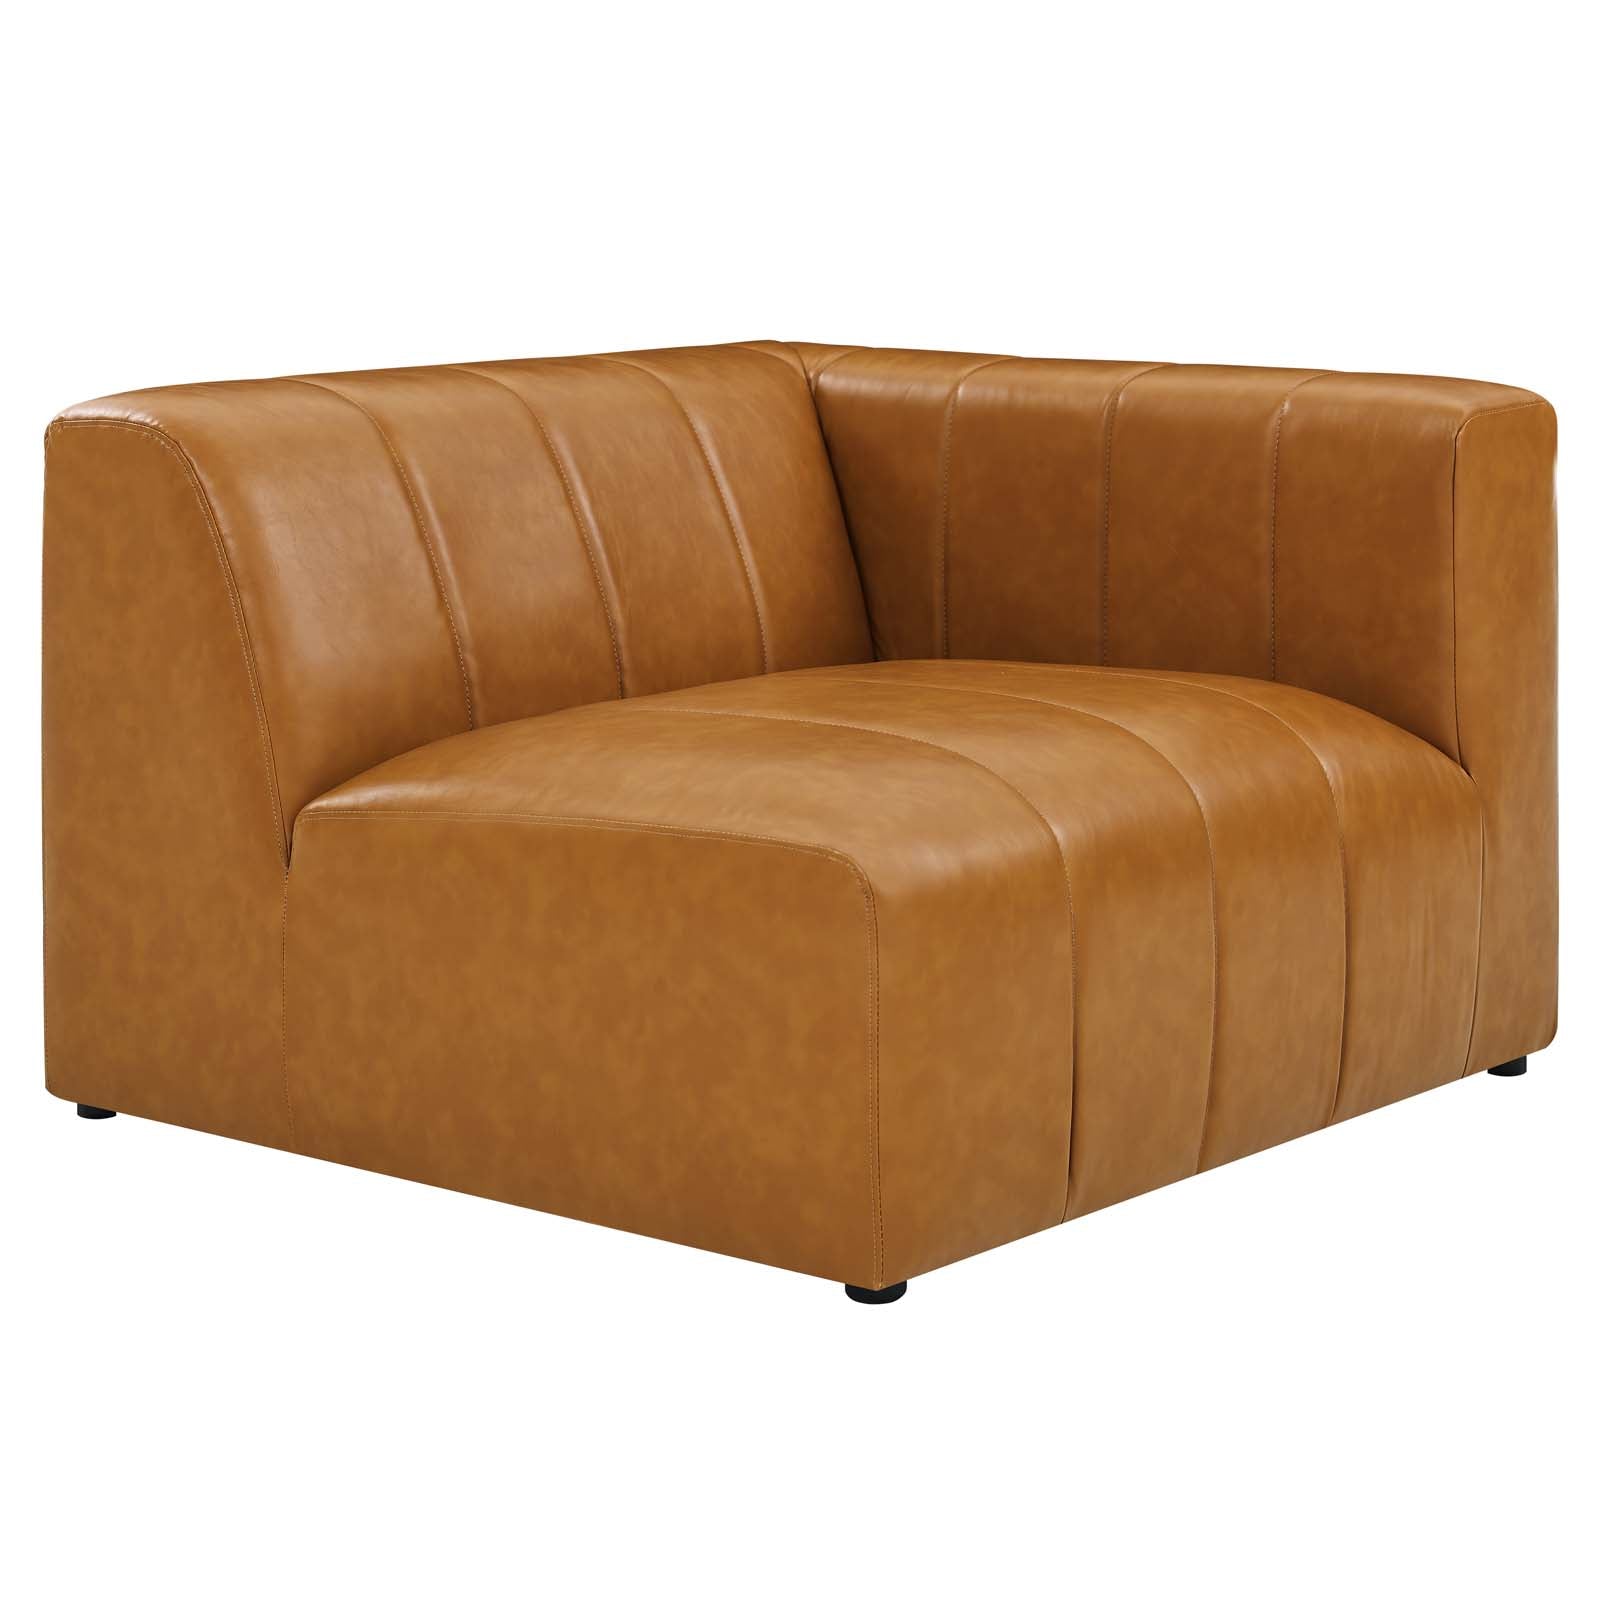 Modway Sectional Sofas - Bartlett Vegan Leather 4-Piece Sectional Sofa Tan